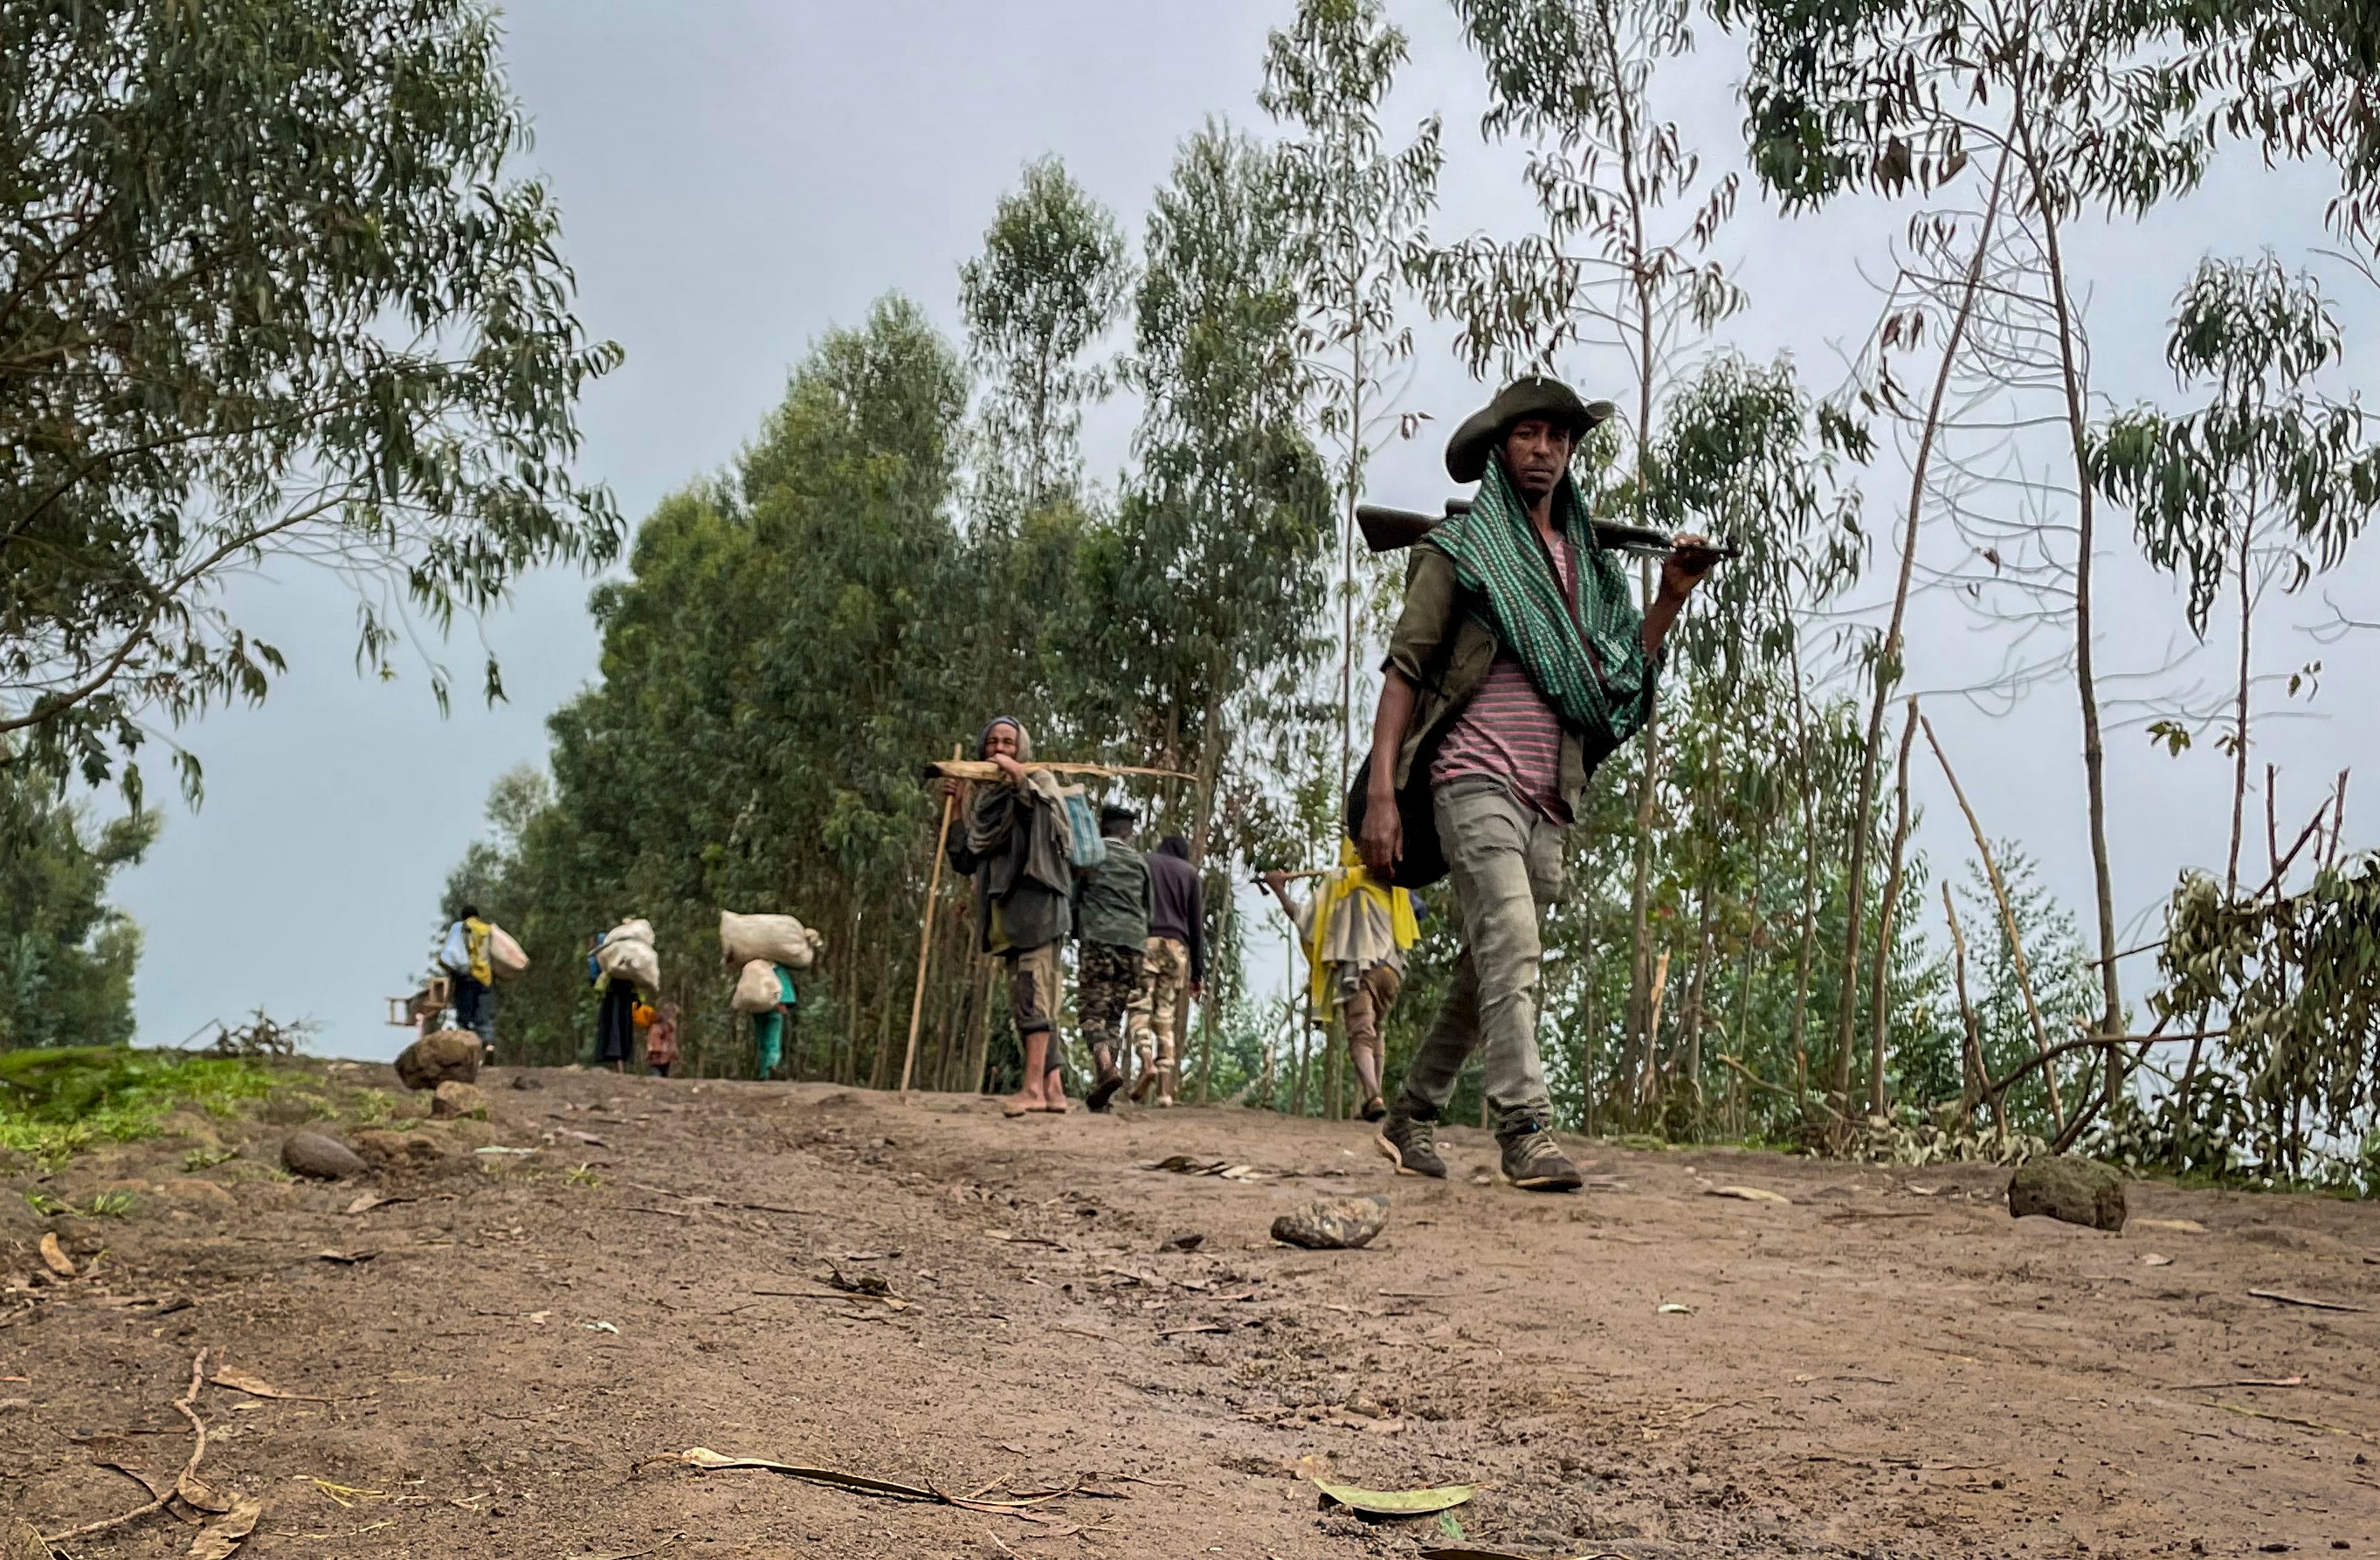 An unidentified armed militia fighter walks down a path as villagers flee with their belongings in the other direction, near the village of Chenna Teklehaymanot, in the Amhara region of northern Ethiopia